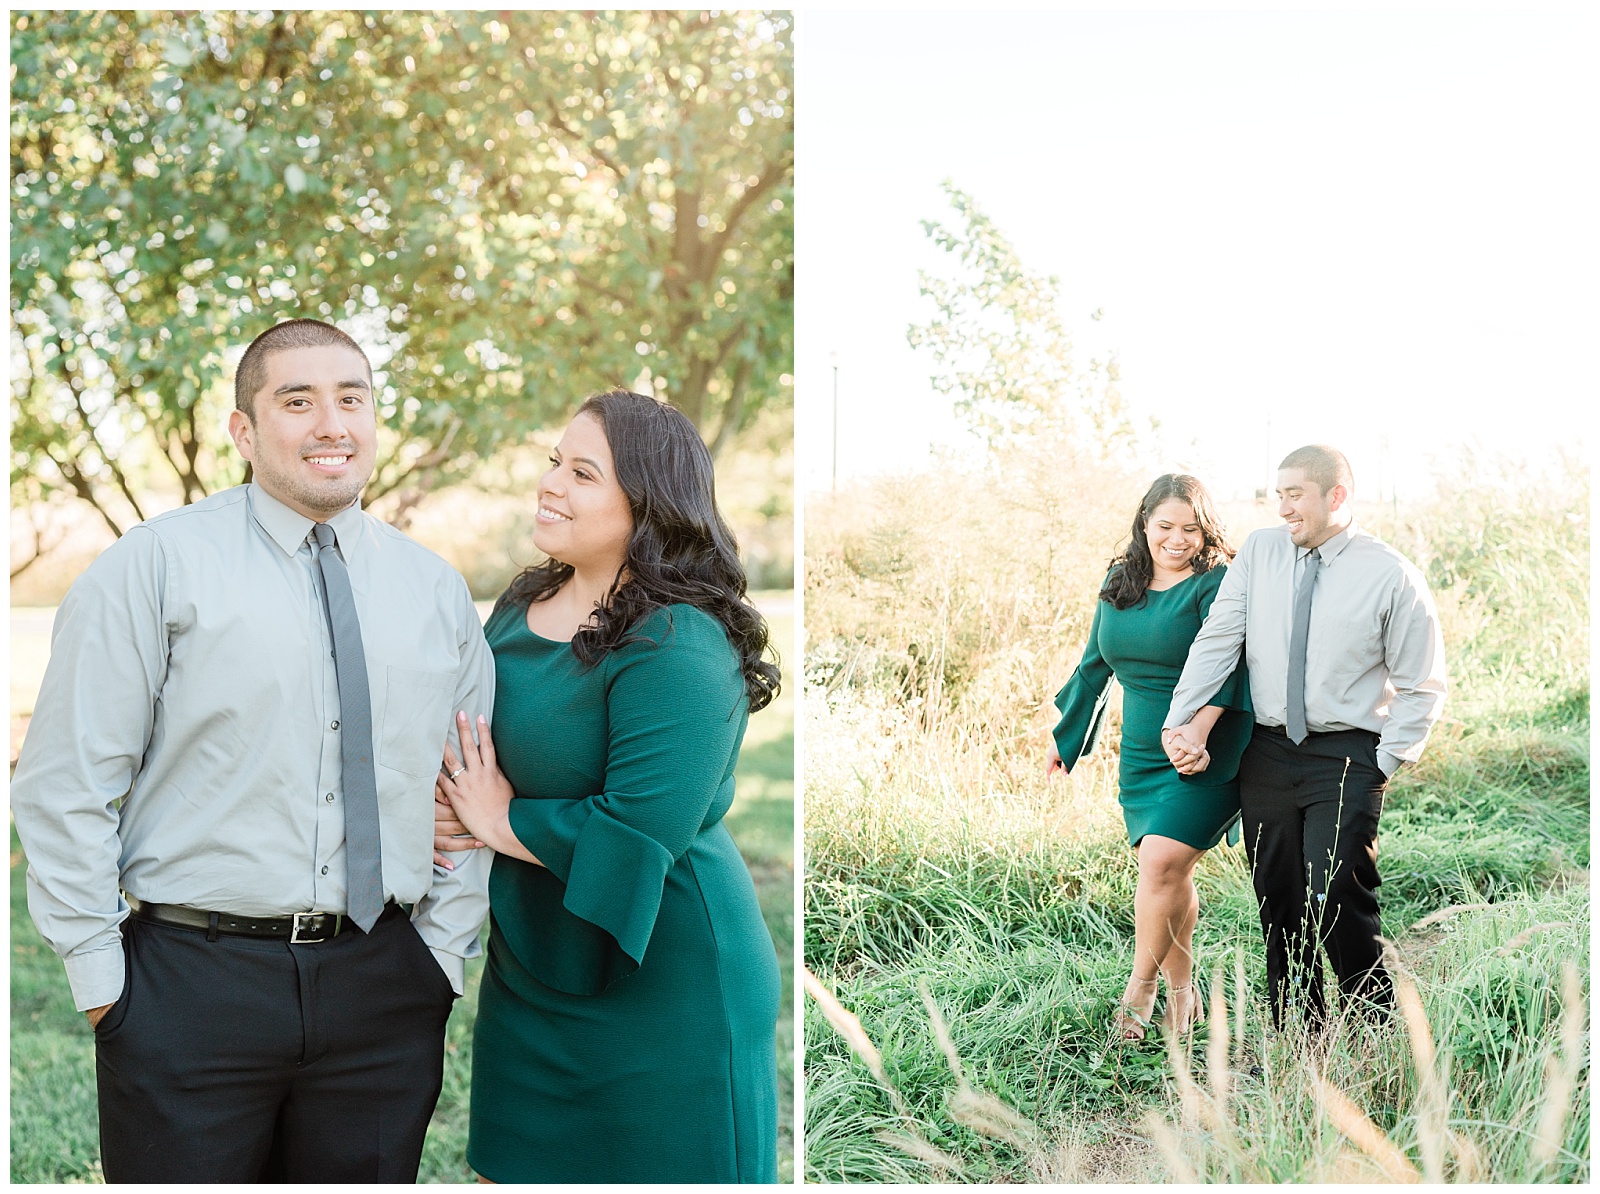 Engaged,Engagement Session,Field,Garden,Jersey City,Liberty State Park,NJ,Wedding Photographer,